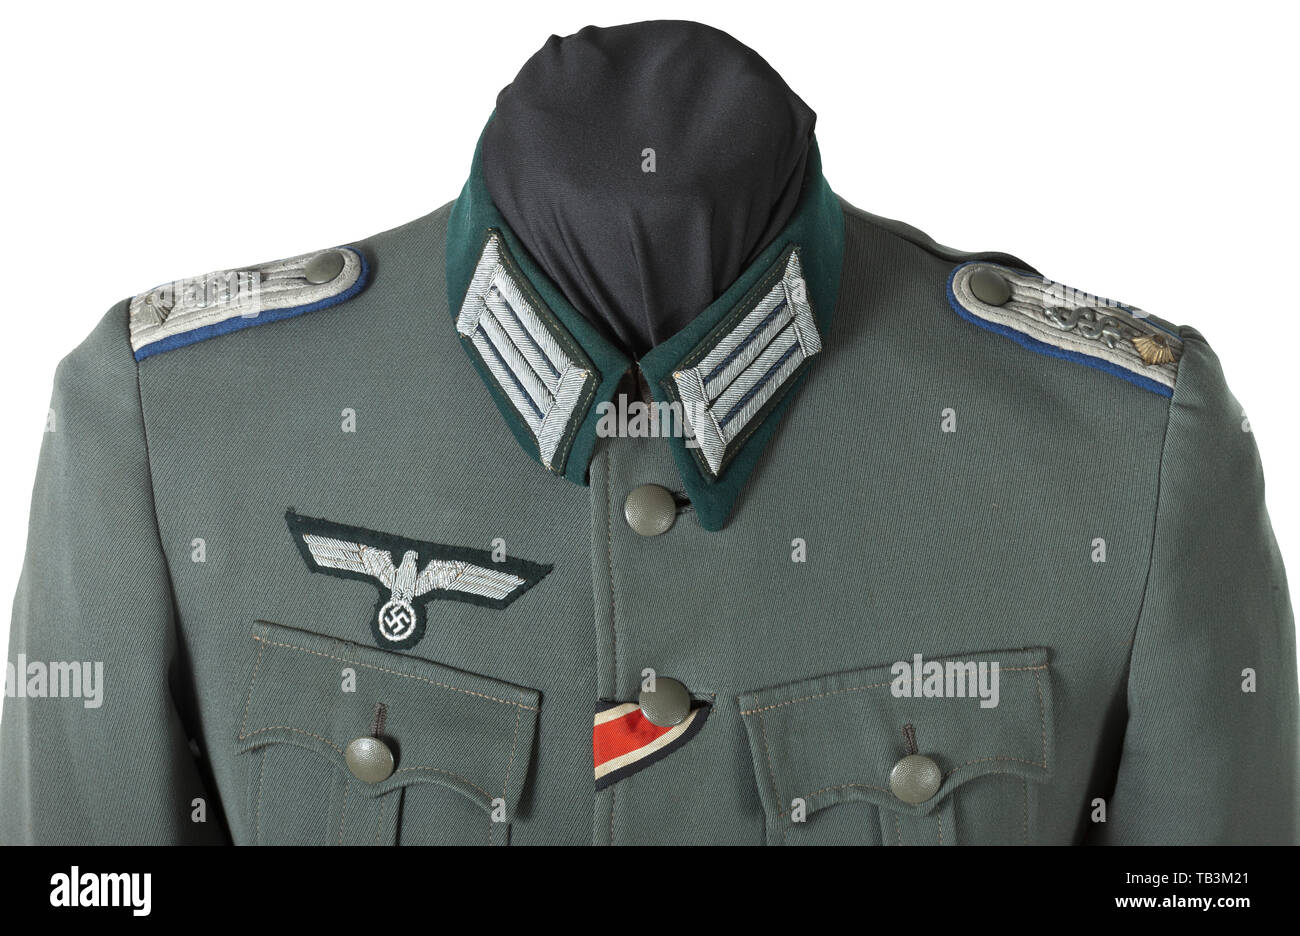 A field tunic of a medical director of the Division "Feldherrnhalle", Private purchase piece made of field-grey gabardine with dark-green collar, field-grey buttons, grey silk lining, hand-embroidered officer's eagle, sewn shoulder boards and collar patches, the left arm with original sewn sleeve band "Feldherrnhalle". The stitching on the left shoulder somewhat loosened (can easily be mended). infantry, military, armed forces, militaria, object, objects, stills, clipping, clippings, cut out, cut-out, cut-outs, historic, historical 20th century, Additional-Rights-Clearance-Info-Not-Available Stock Photo